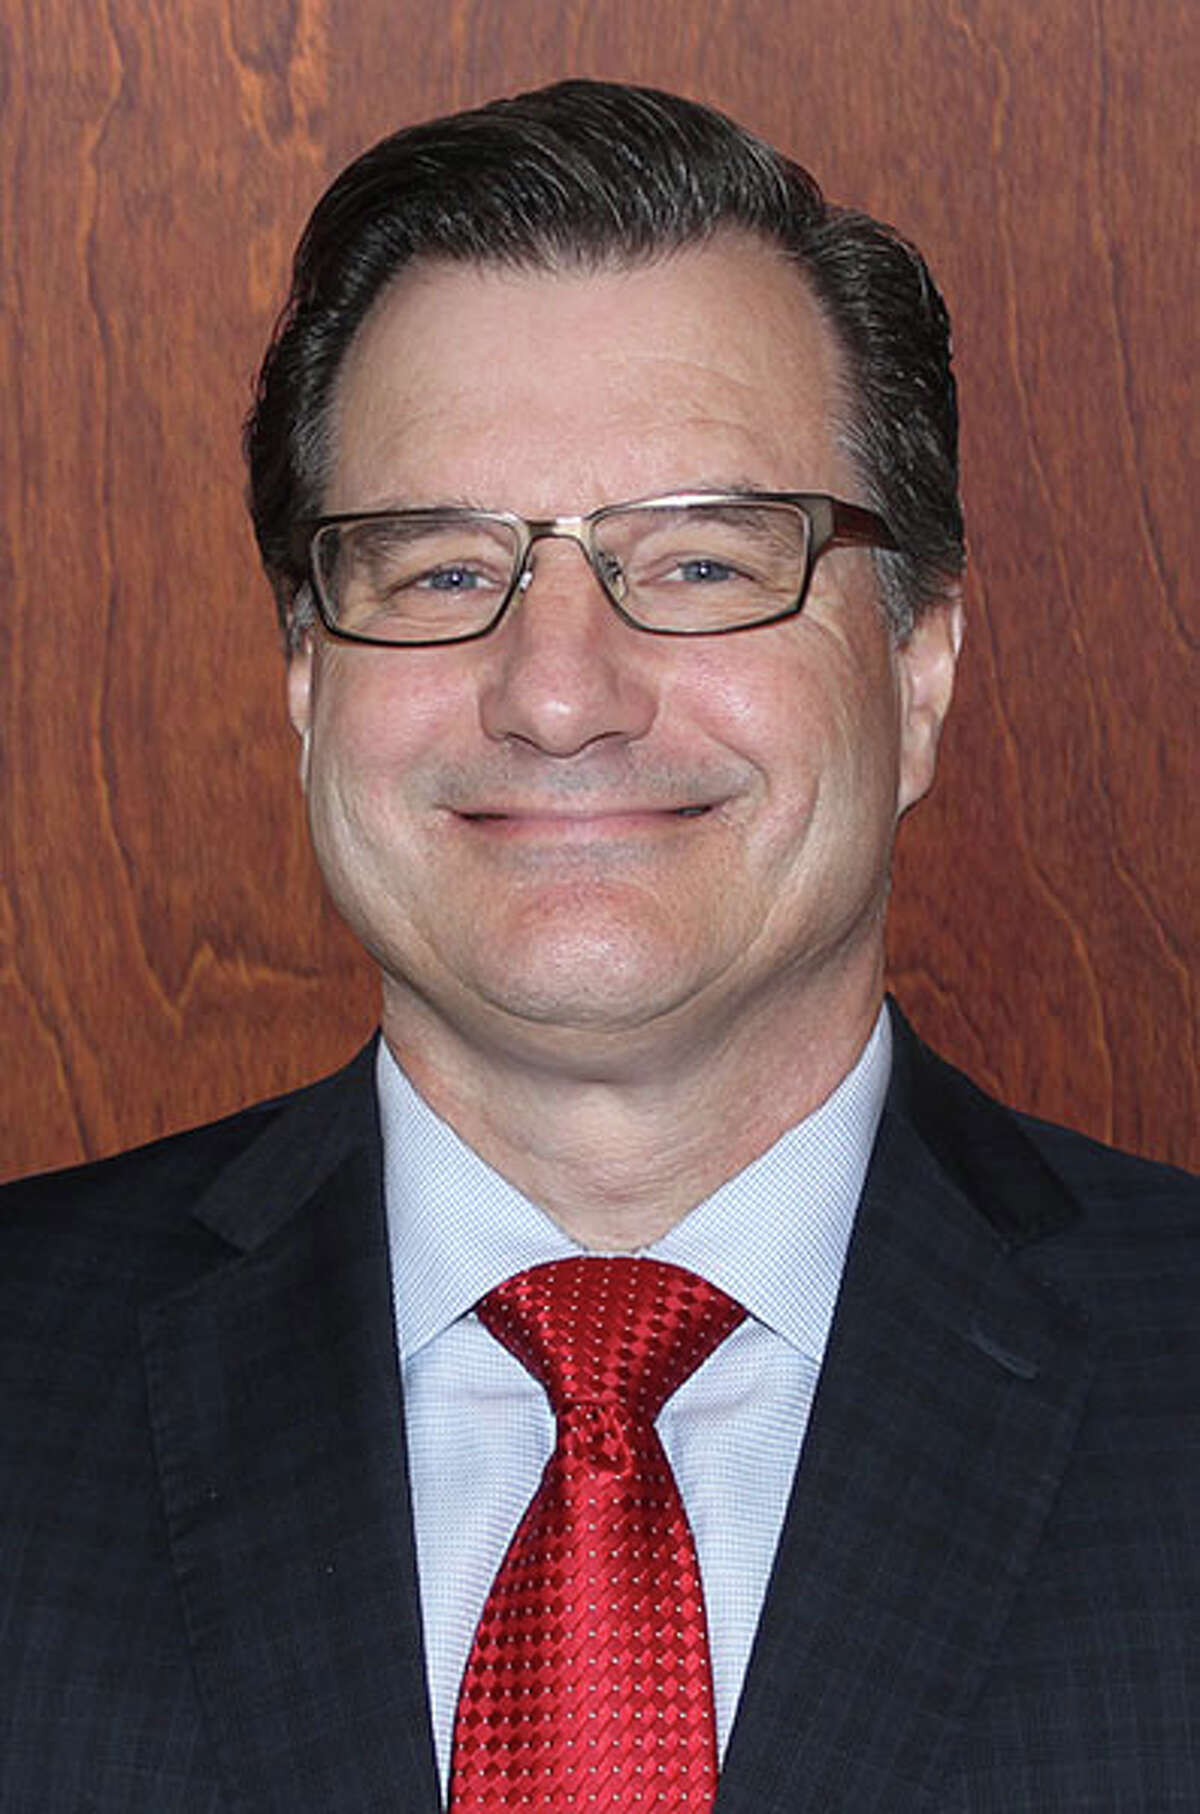 Robert S. Schneider of Gansevoort will be the New York State School Boards Association's next executive director, effective Jan. 1, 2020. (Provided)